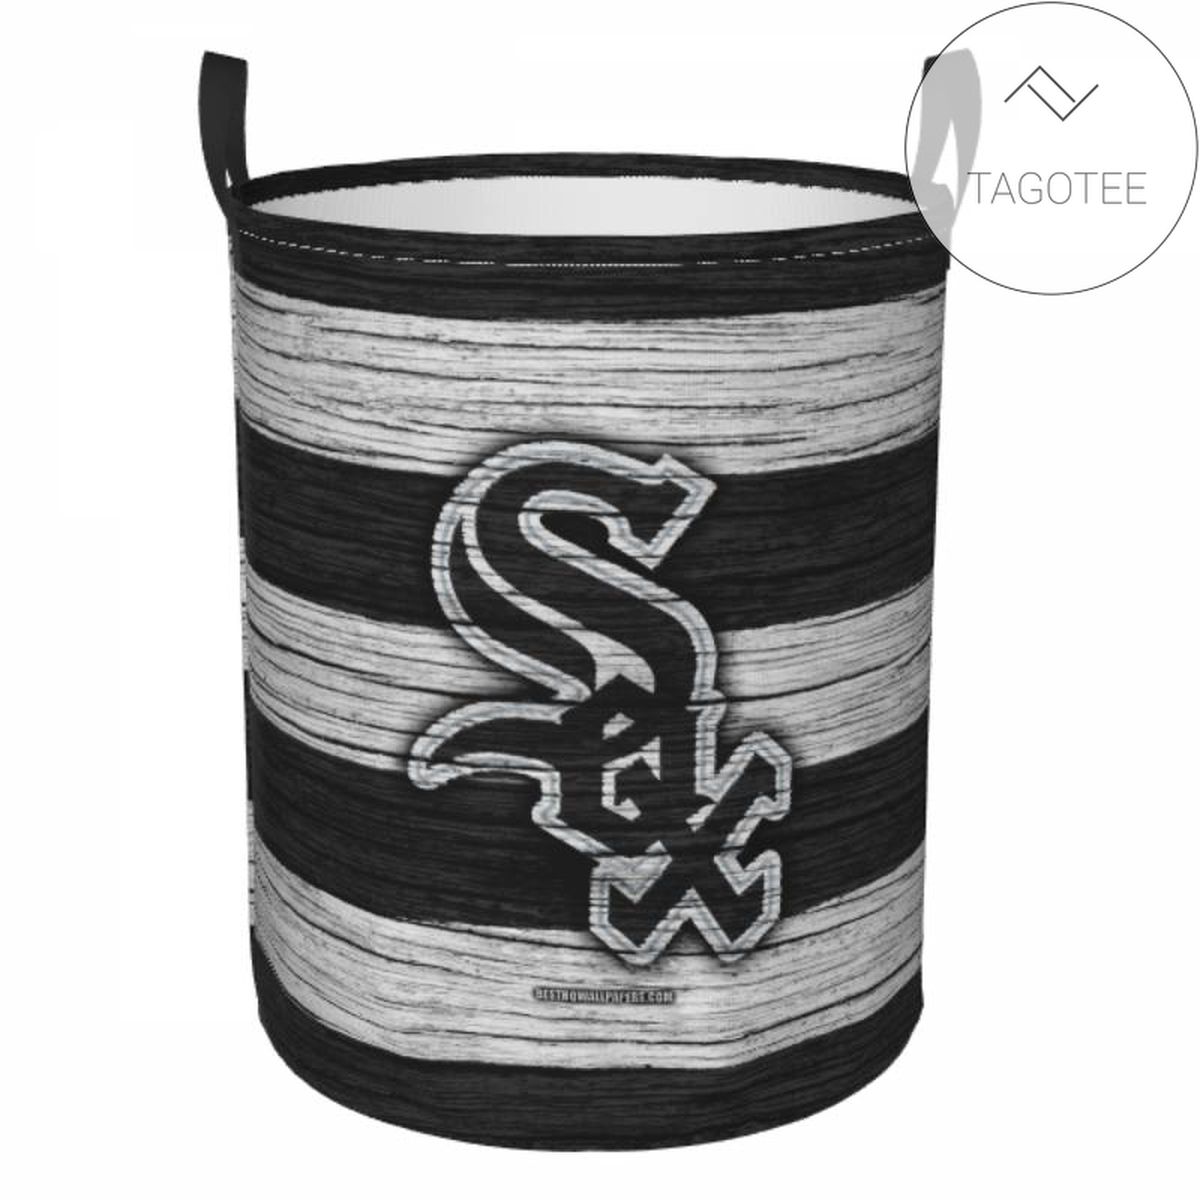 Mlb Chicago White Sox Clothes Basket Target Laundry Bag Type #092406